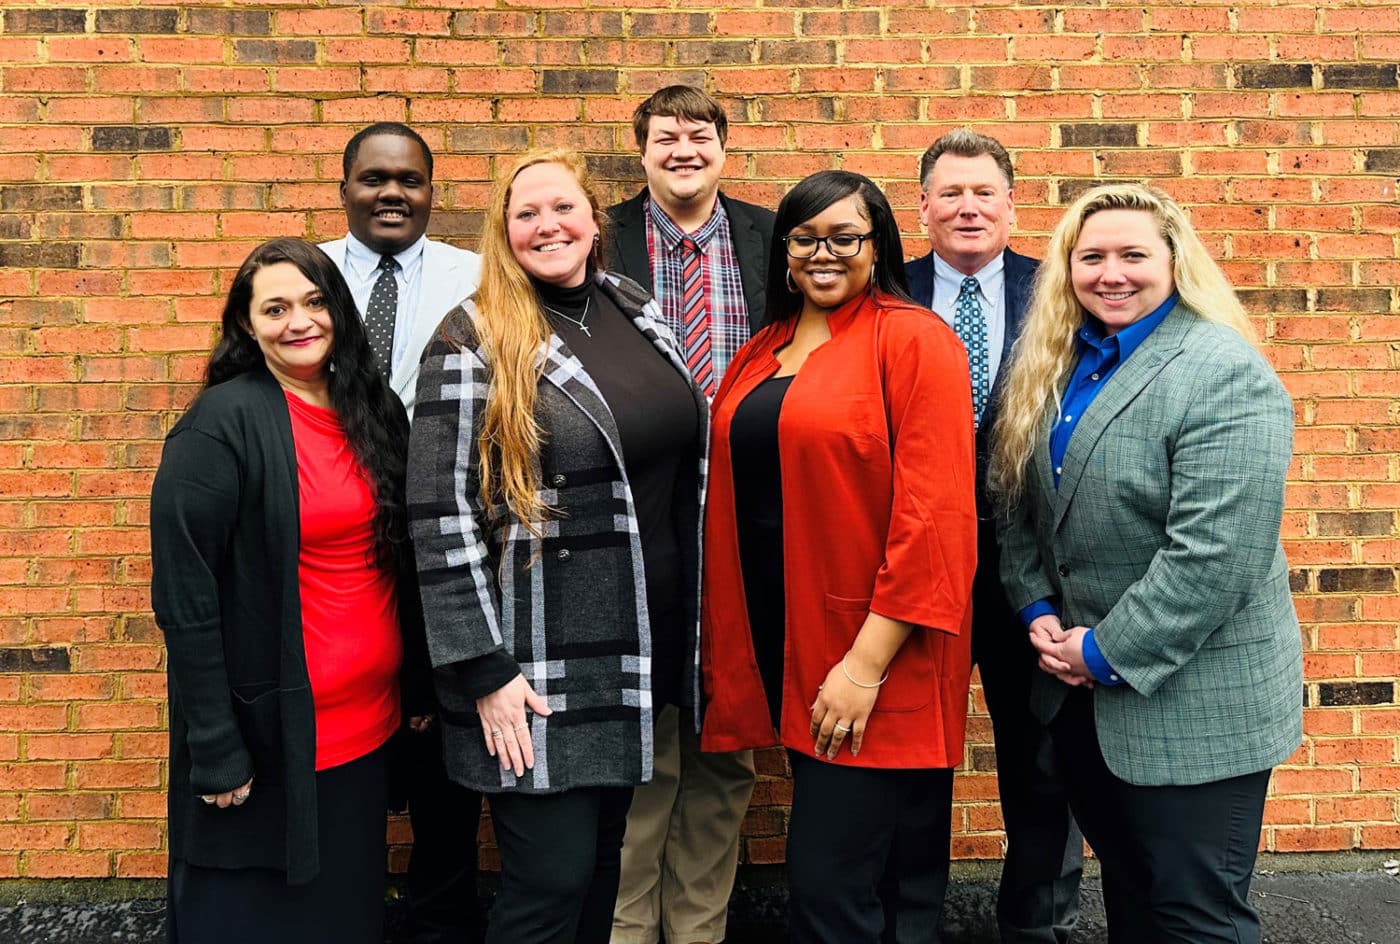 Community Options, Inc. of Chattanooga, TN was established in 2003 to provide community-based options for residential and employment support services to individuals with disabilities living in the area.